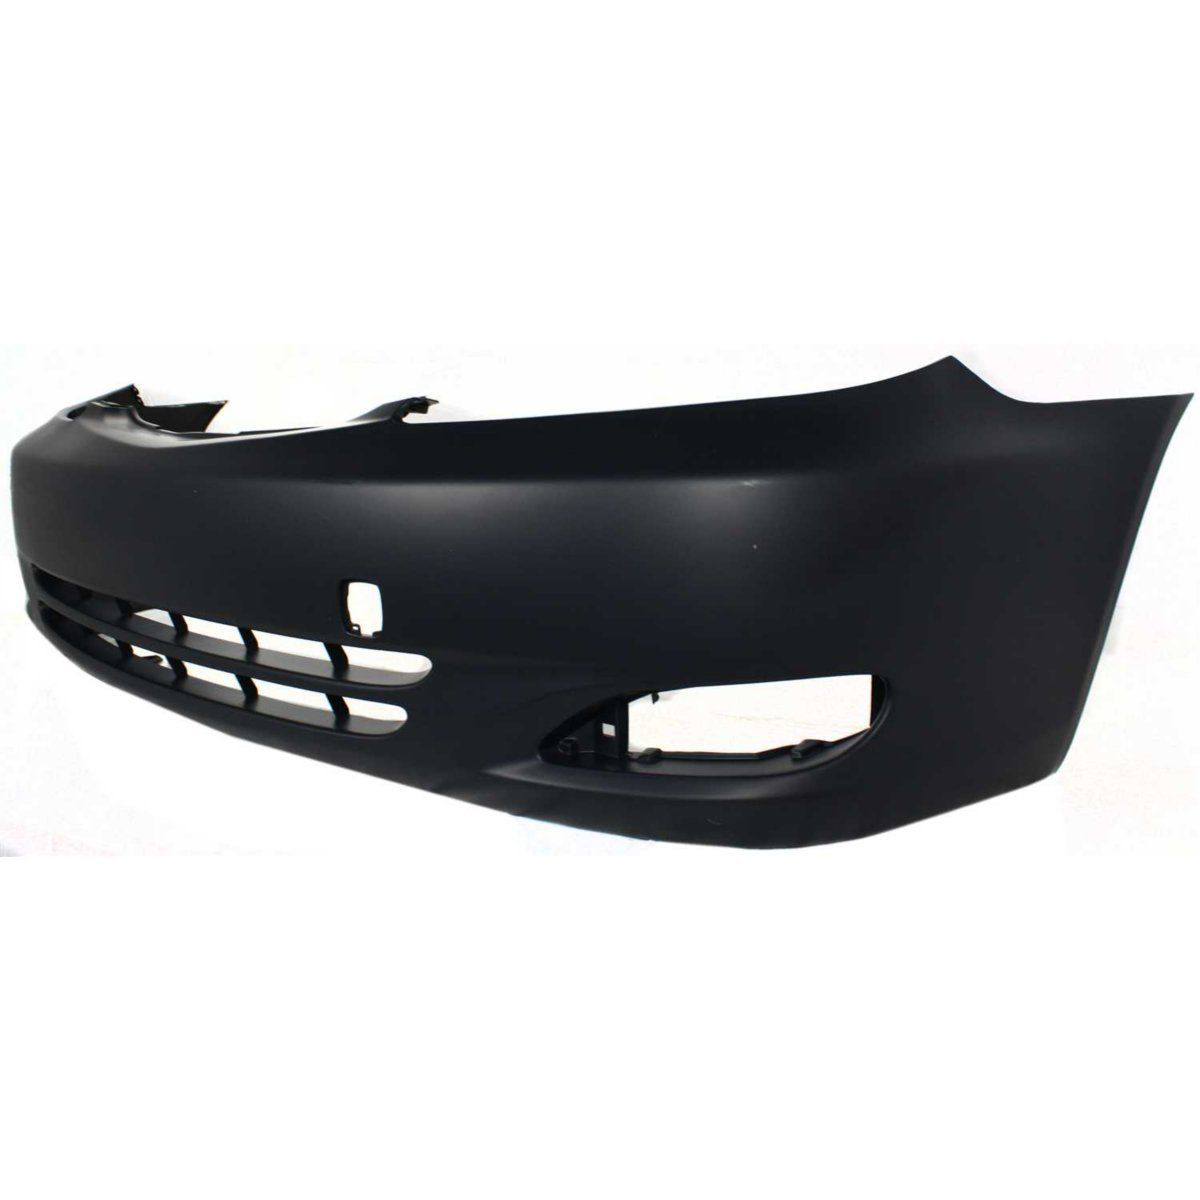 2005 toyota camry front bumper